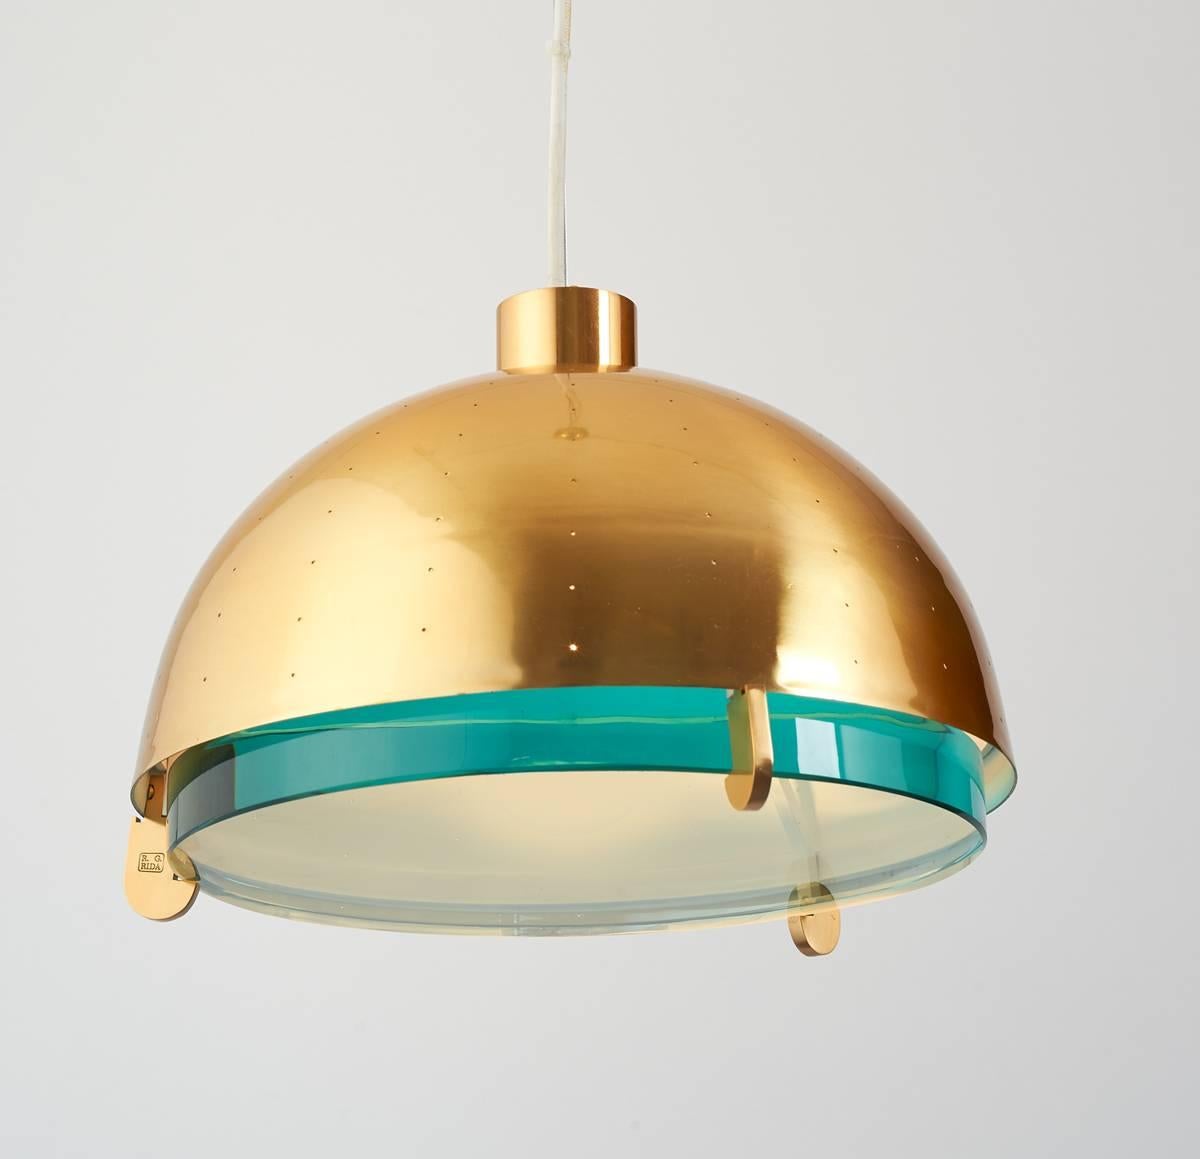 Roberto G. Rida (b. 1943).
Limited edition of four adjustable lanterns in perforated brass with 1 inch ground glass lens, after a model of Max Ingrand.
Signed on mount,
Italy, 2016.
Measures: 12 diameter x 8 H + canopy and adjustable wire.
One